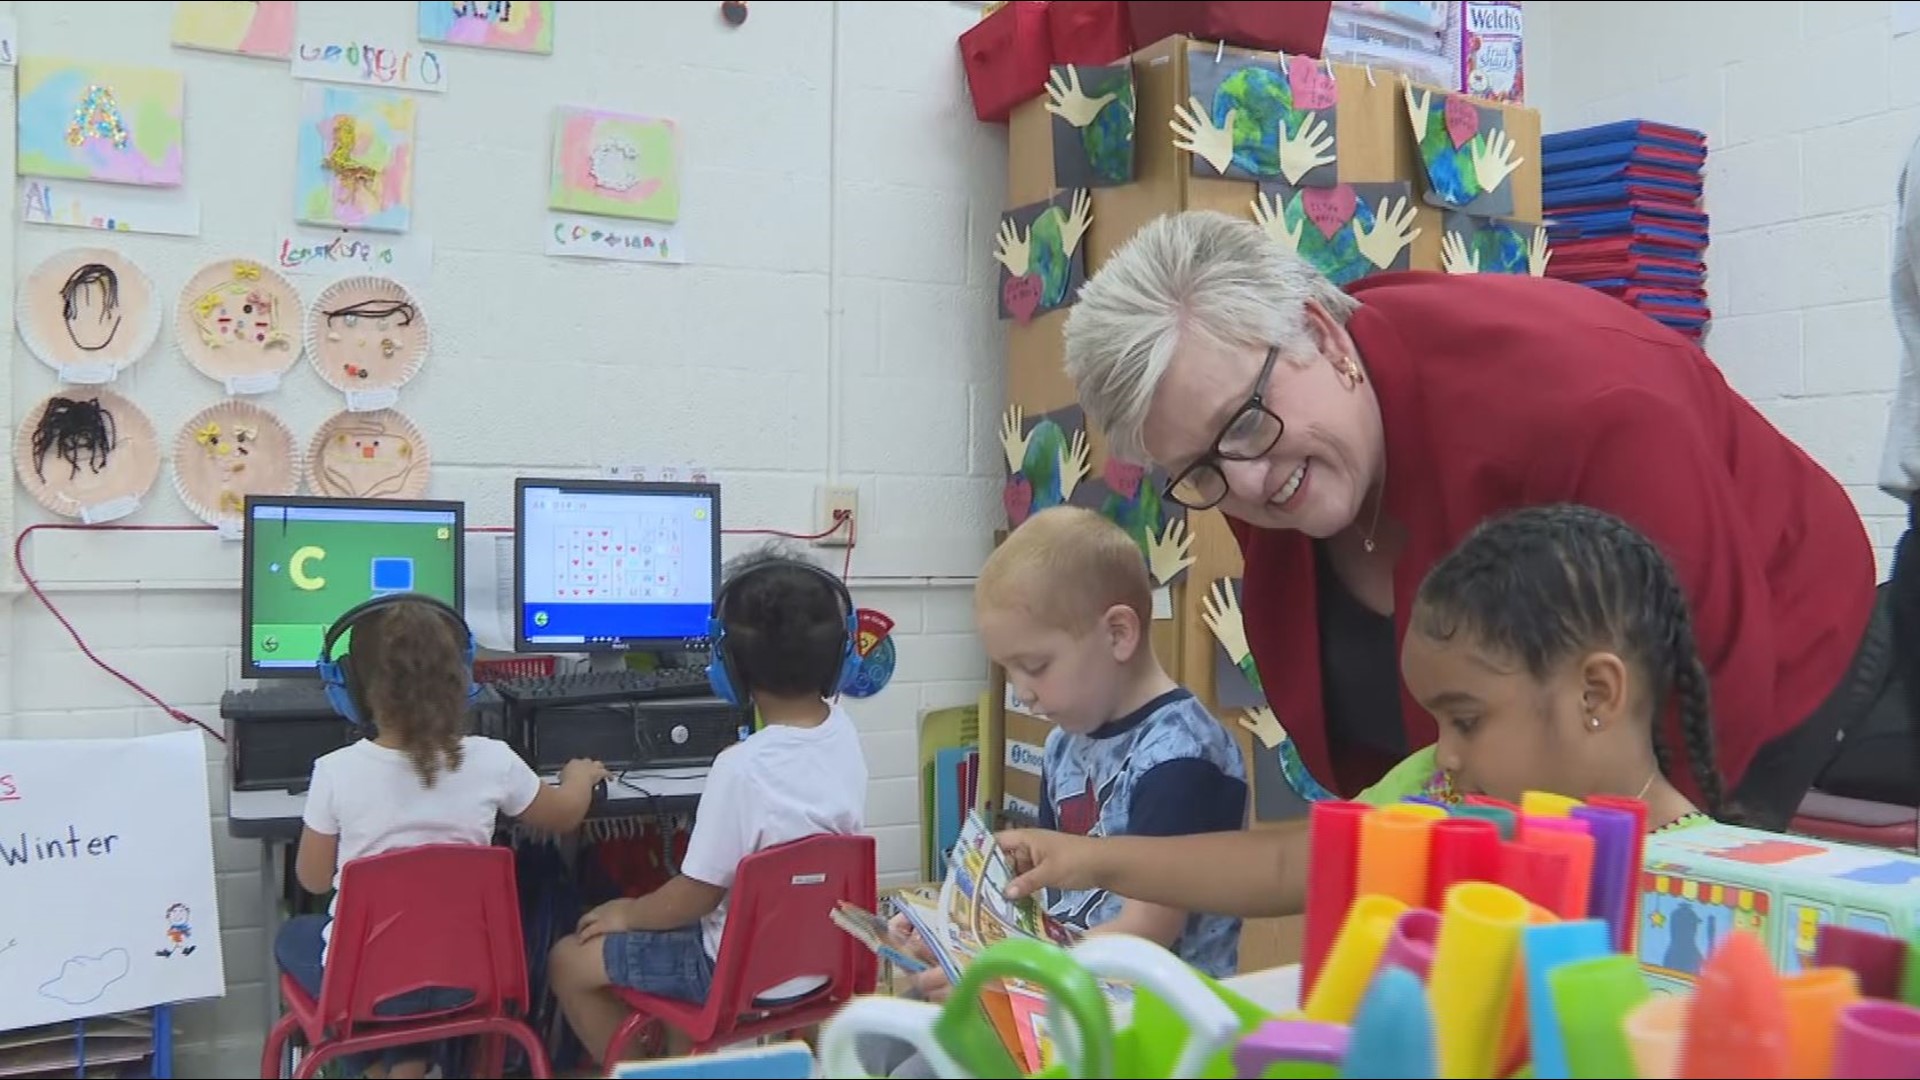 Leading Ladies: Belton ISD superintendent educates with more than 20 years under her belt ...